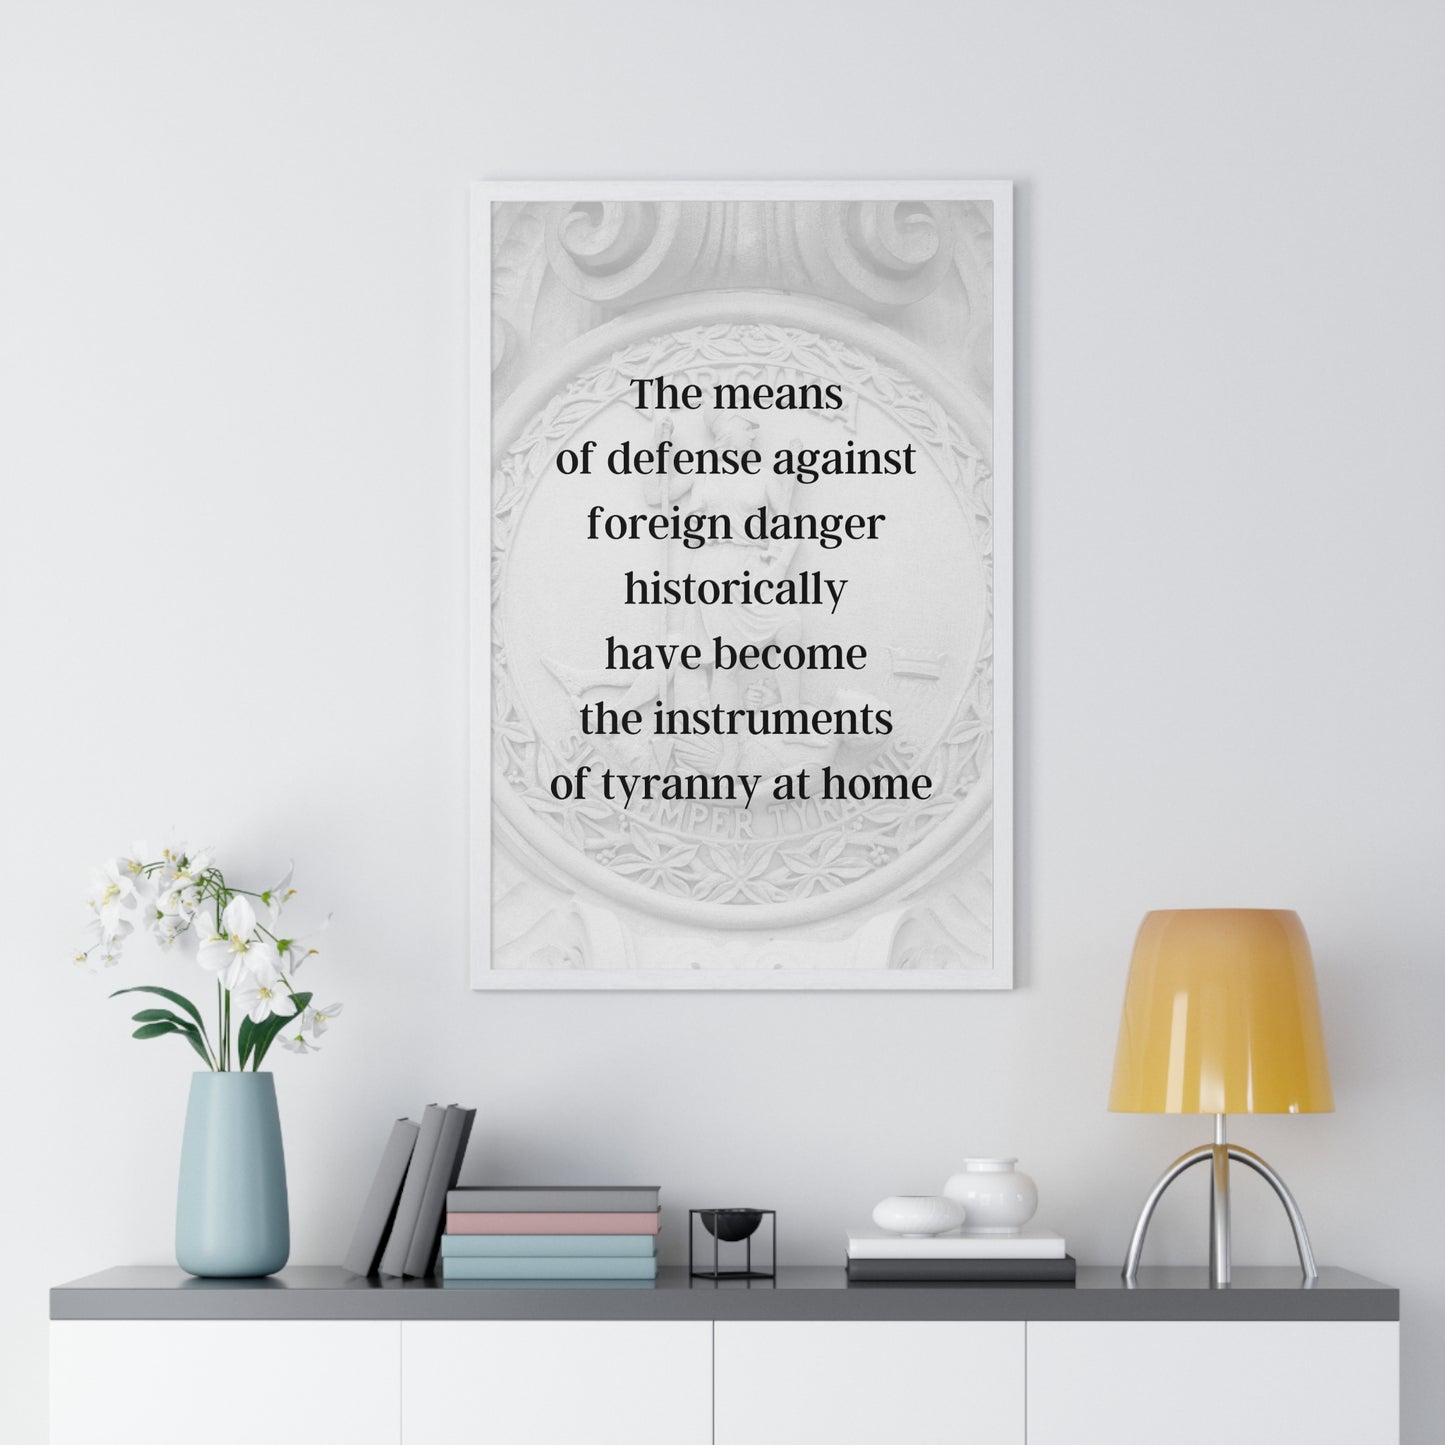 James Madison Quote 2, Poster Art, Sic Semper Tyrannis Print, 4th President of the United States, Democracy, Freedom, American Patriots, AI Art, Political Art, Presidential Quotes, Inspirational Quotes